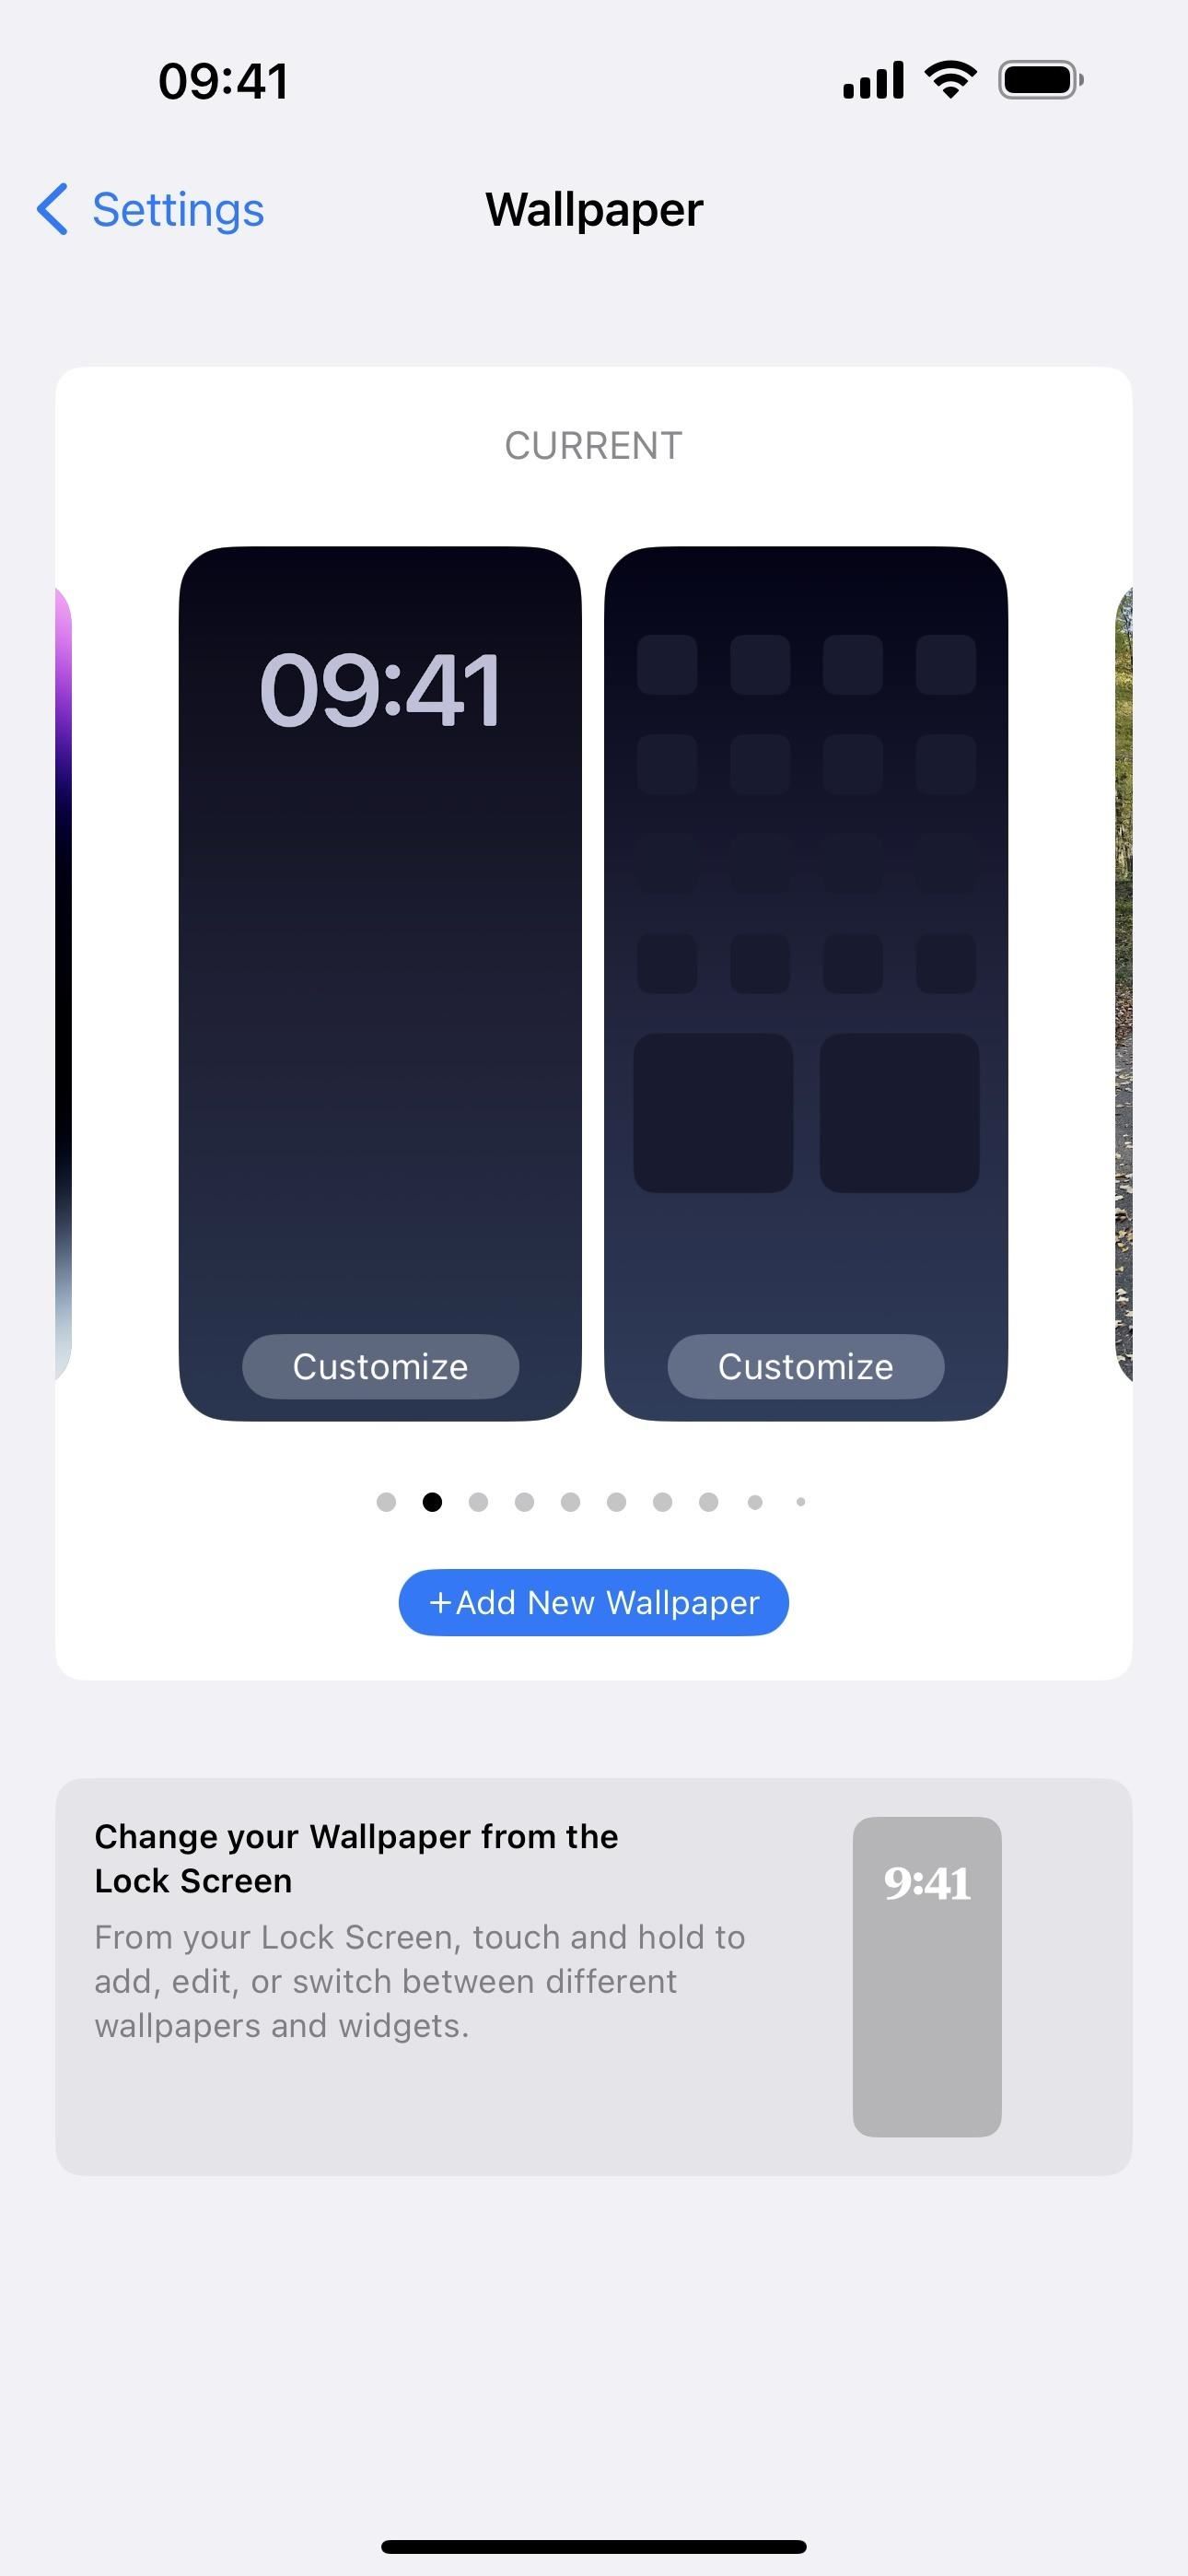 Rotate Wallpapers on Your iPhone to Photo Shuffle All Your Favorite Pics by Tap, Lock, Hour, or Day